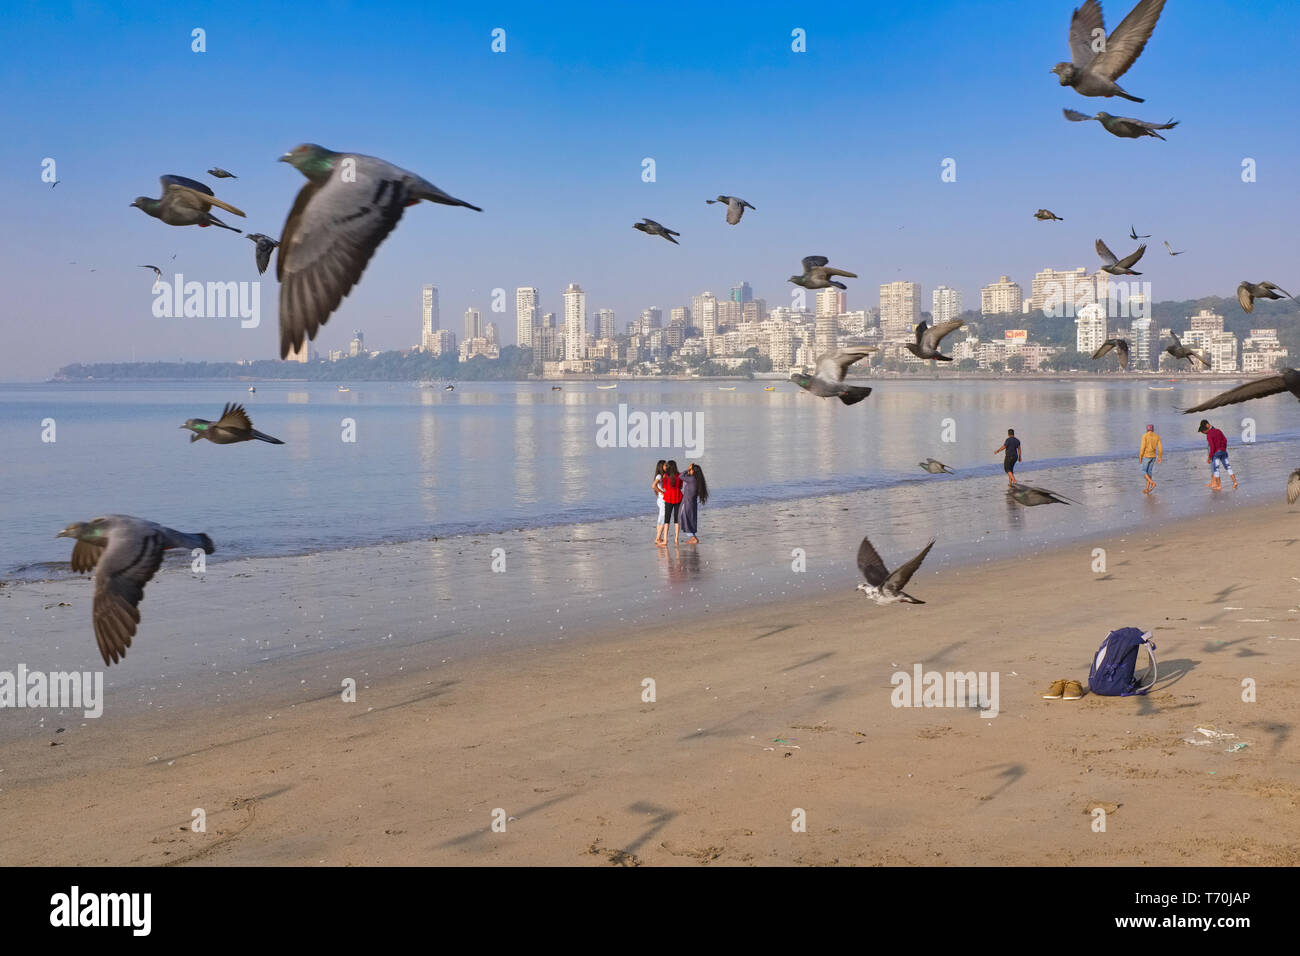 A flock of pigeons flies over Chowpatty Brach, off Marine Drivby the Arabian Sea in Mumbai, India, while some early morning visitors enjoy the scenery Stock Photo